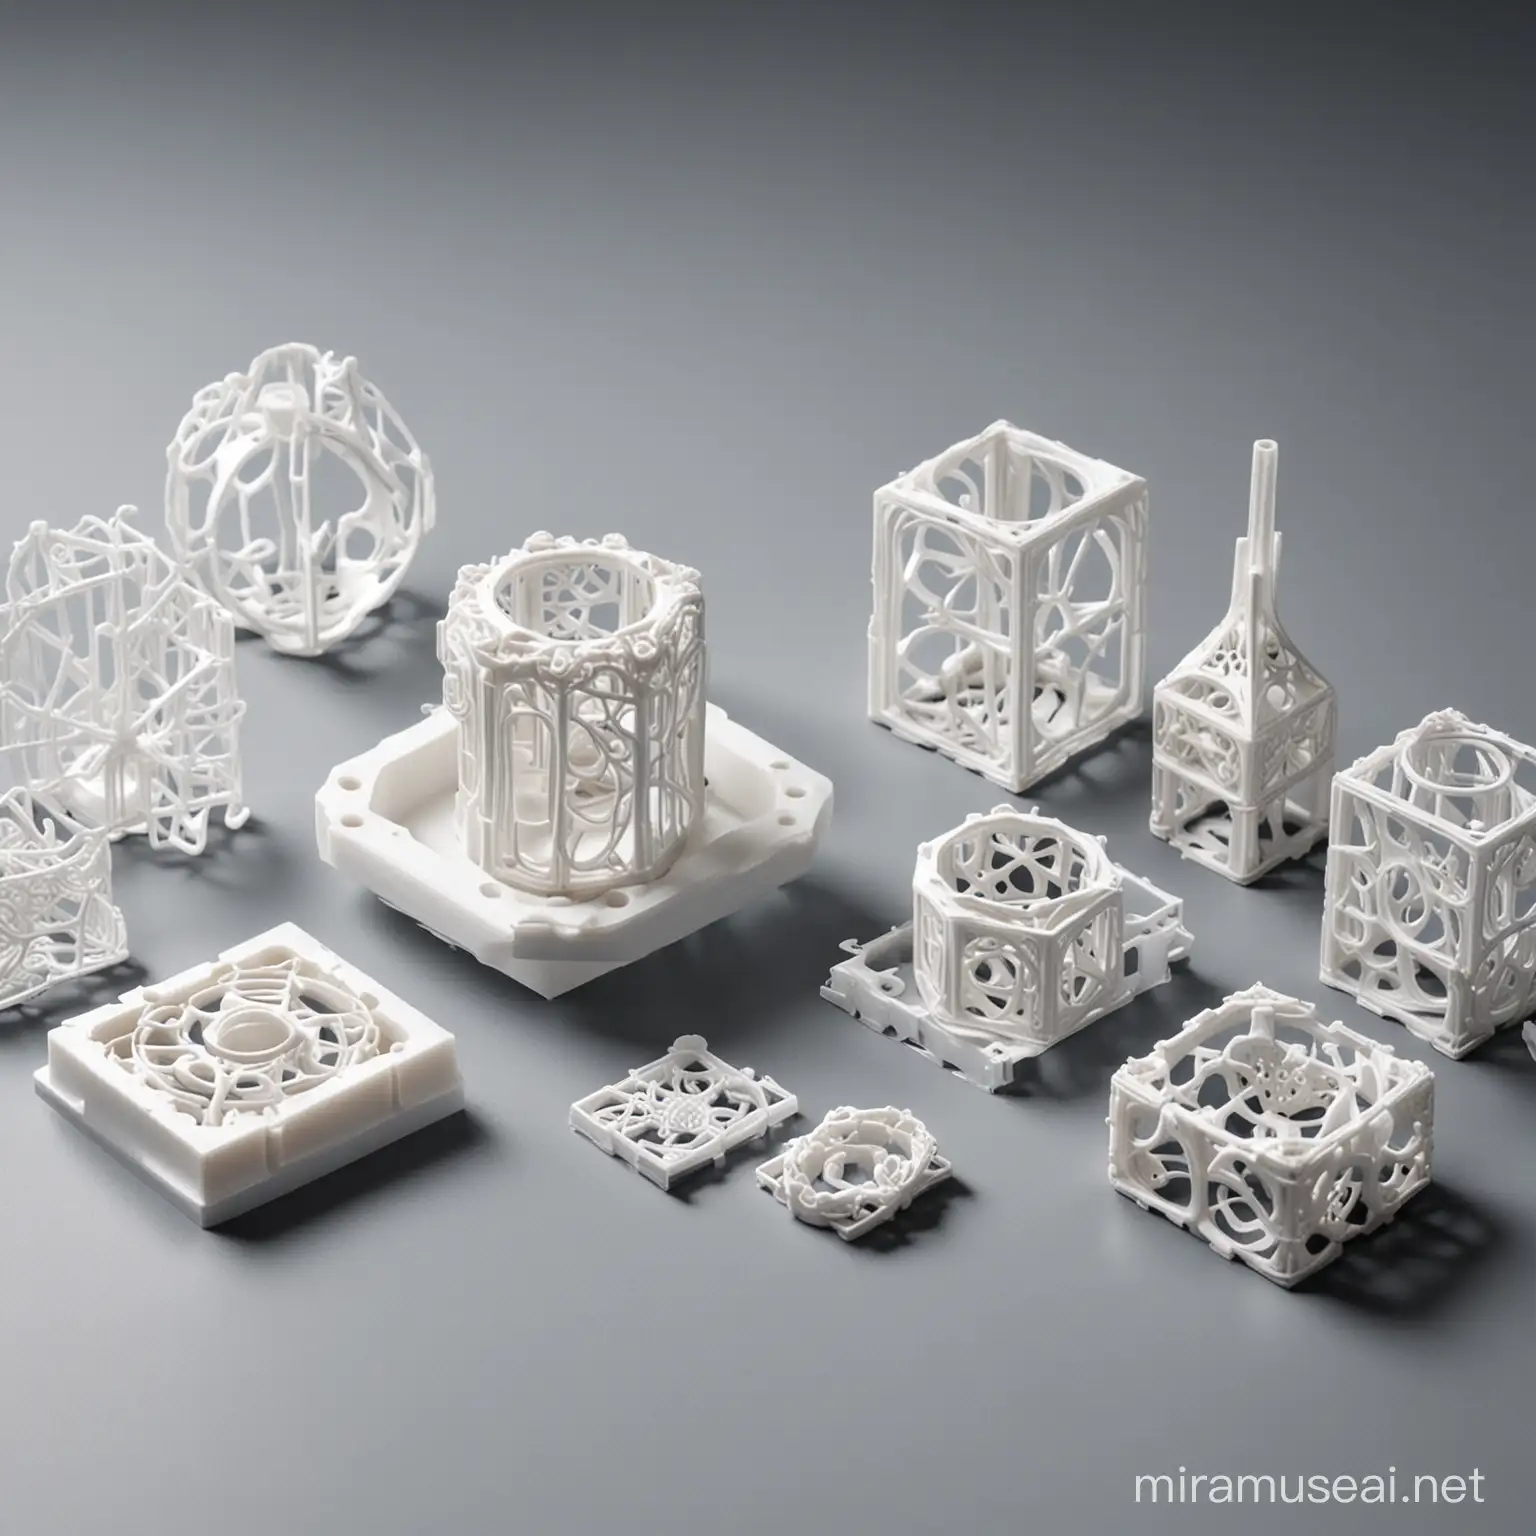 Precision 3D Printing Crafting HighQuality Objects